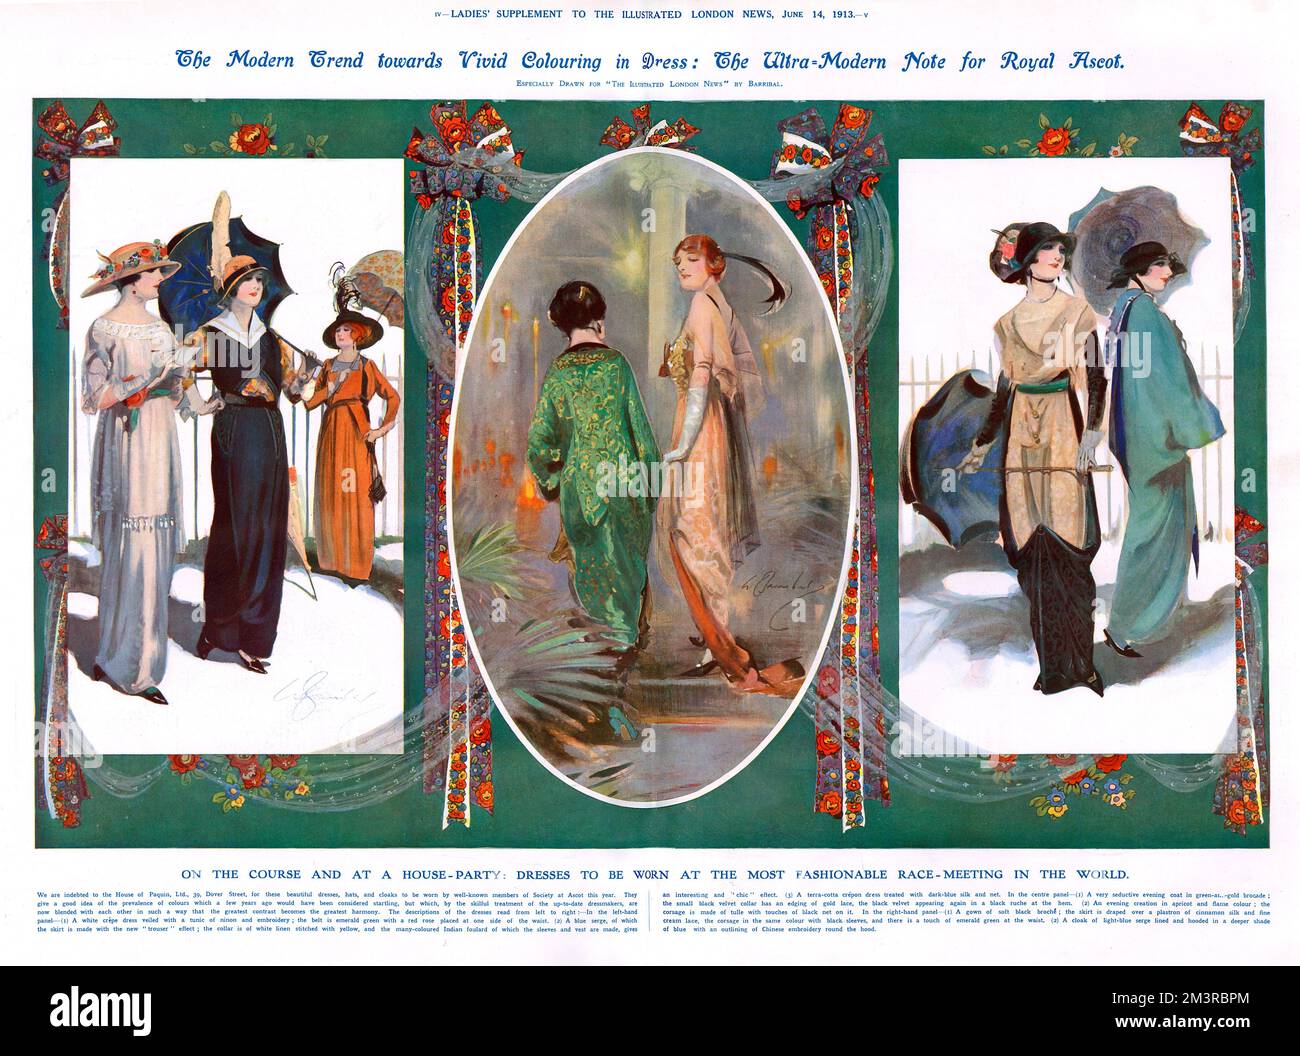 Series of illustrations showing fashionable brightly coloured dresses and garments to be worn by women at Royal Ascot during 1913. On the left a white crepe dress with emerald green belt with a red rose on one side of the waist; a blue serge with a white linen collar and a multicoloured Indian foulard;  a terracotta crepon dress treated with dark-blue silk and net. In the centre panel is an evening coat in green and gold brocade and another evening creation in apricot and flame colour. In the right panel are a gown of black broche with the skirt draped over a plastron of cinnamon silk and lace Stock Photo